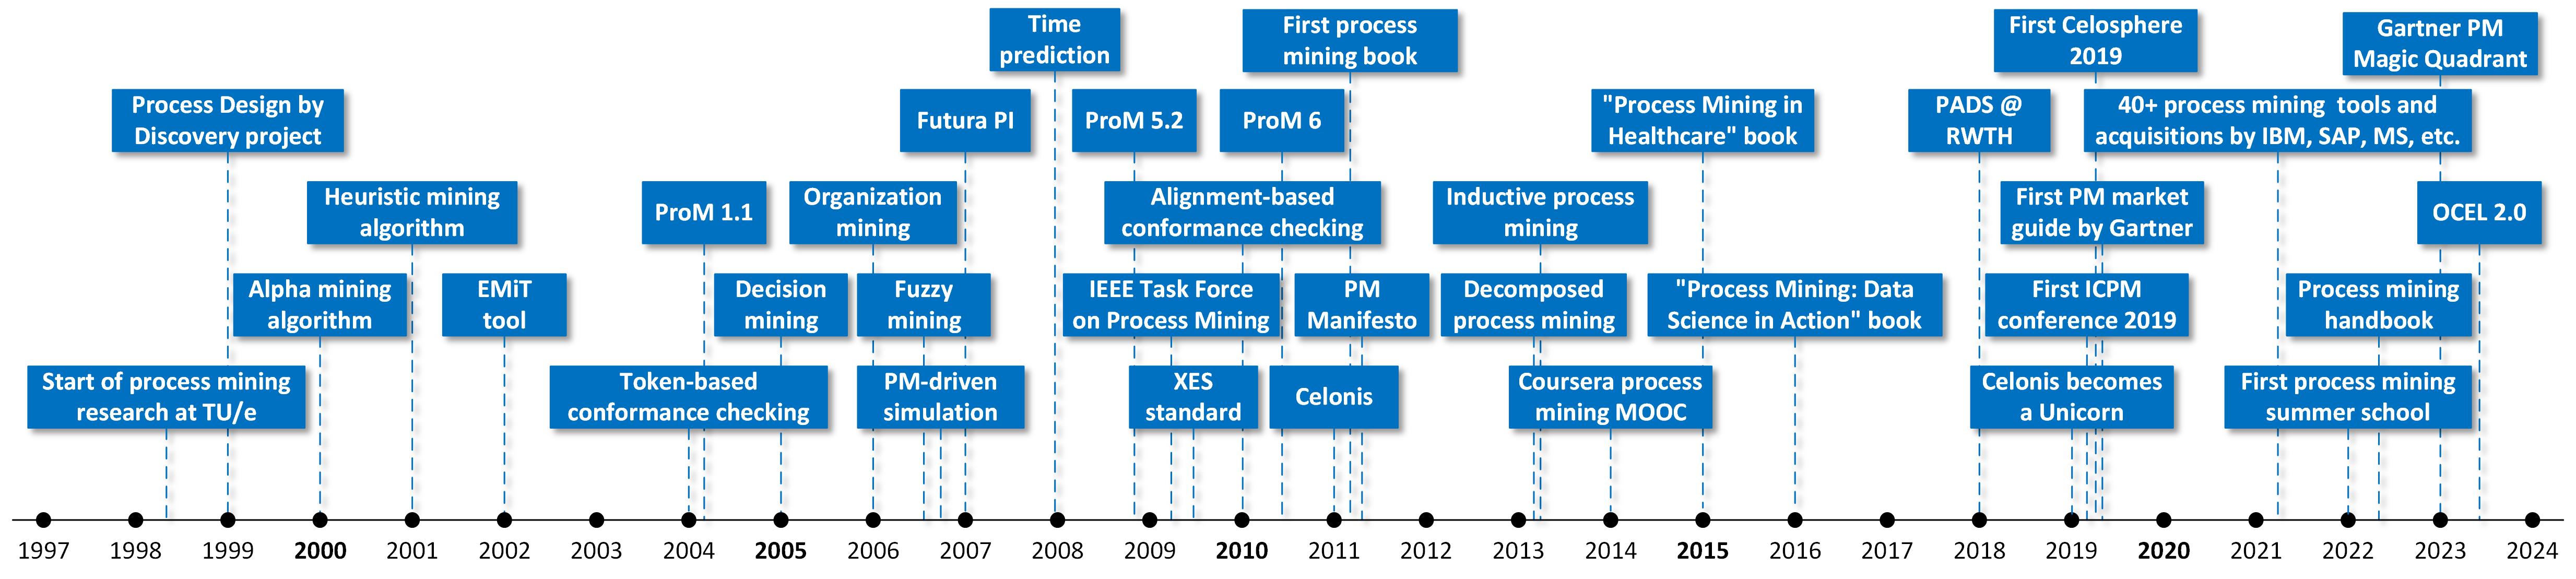 Timeline of process mining